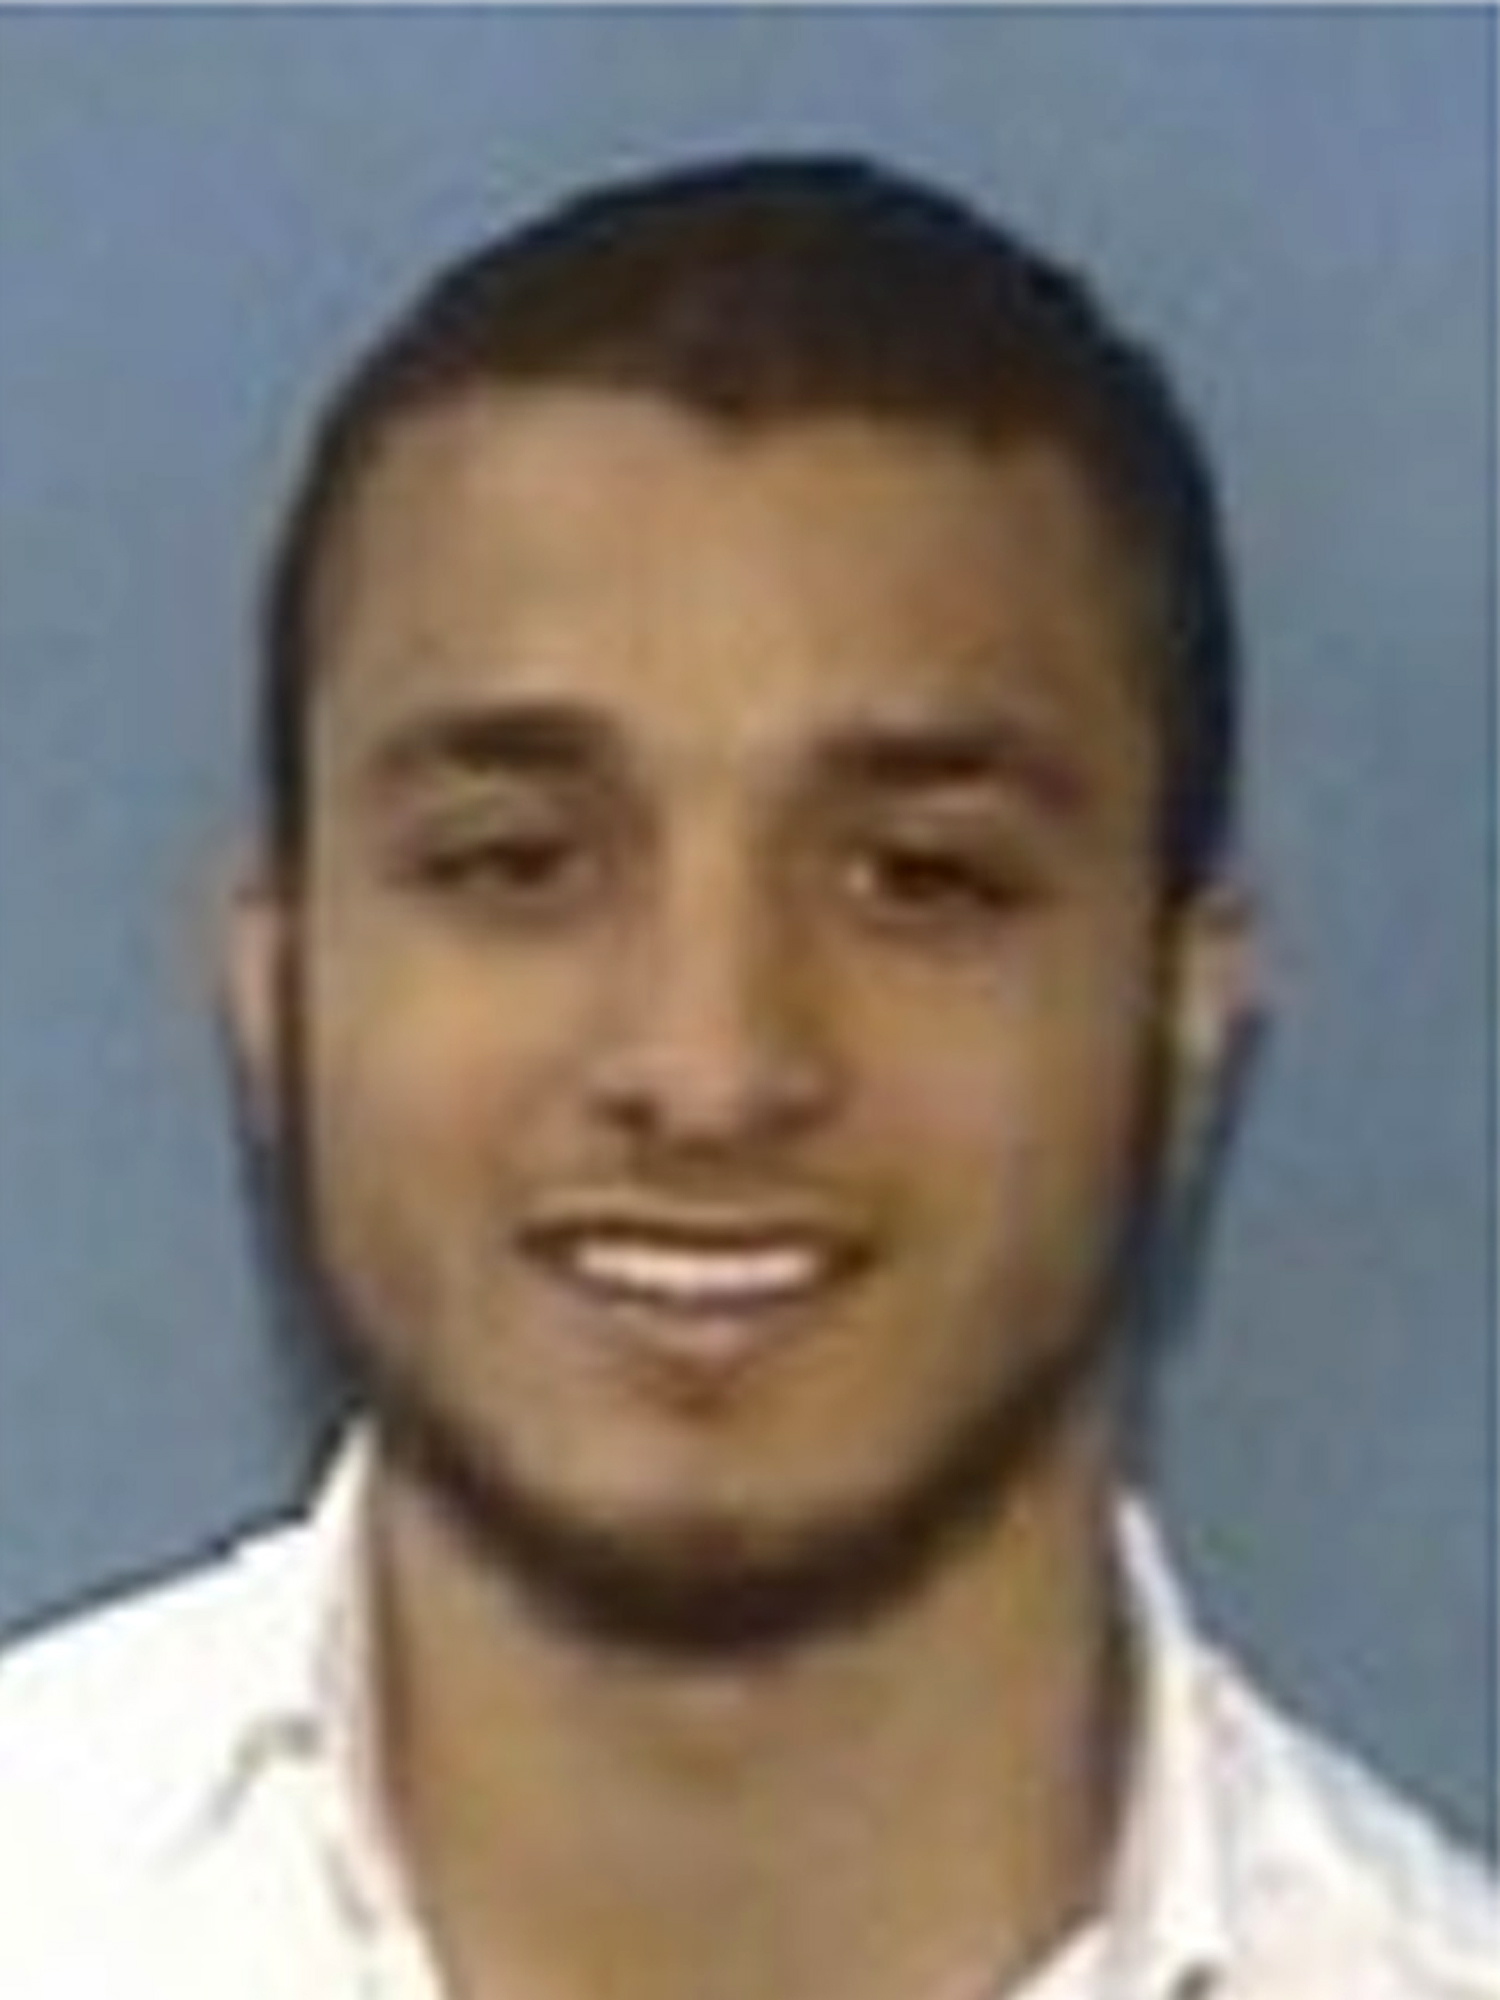 Jude Kenan Mohammad is an American citizen killed in a U.S.